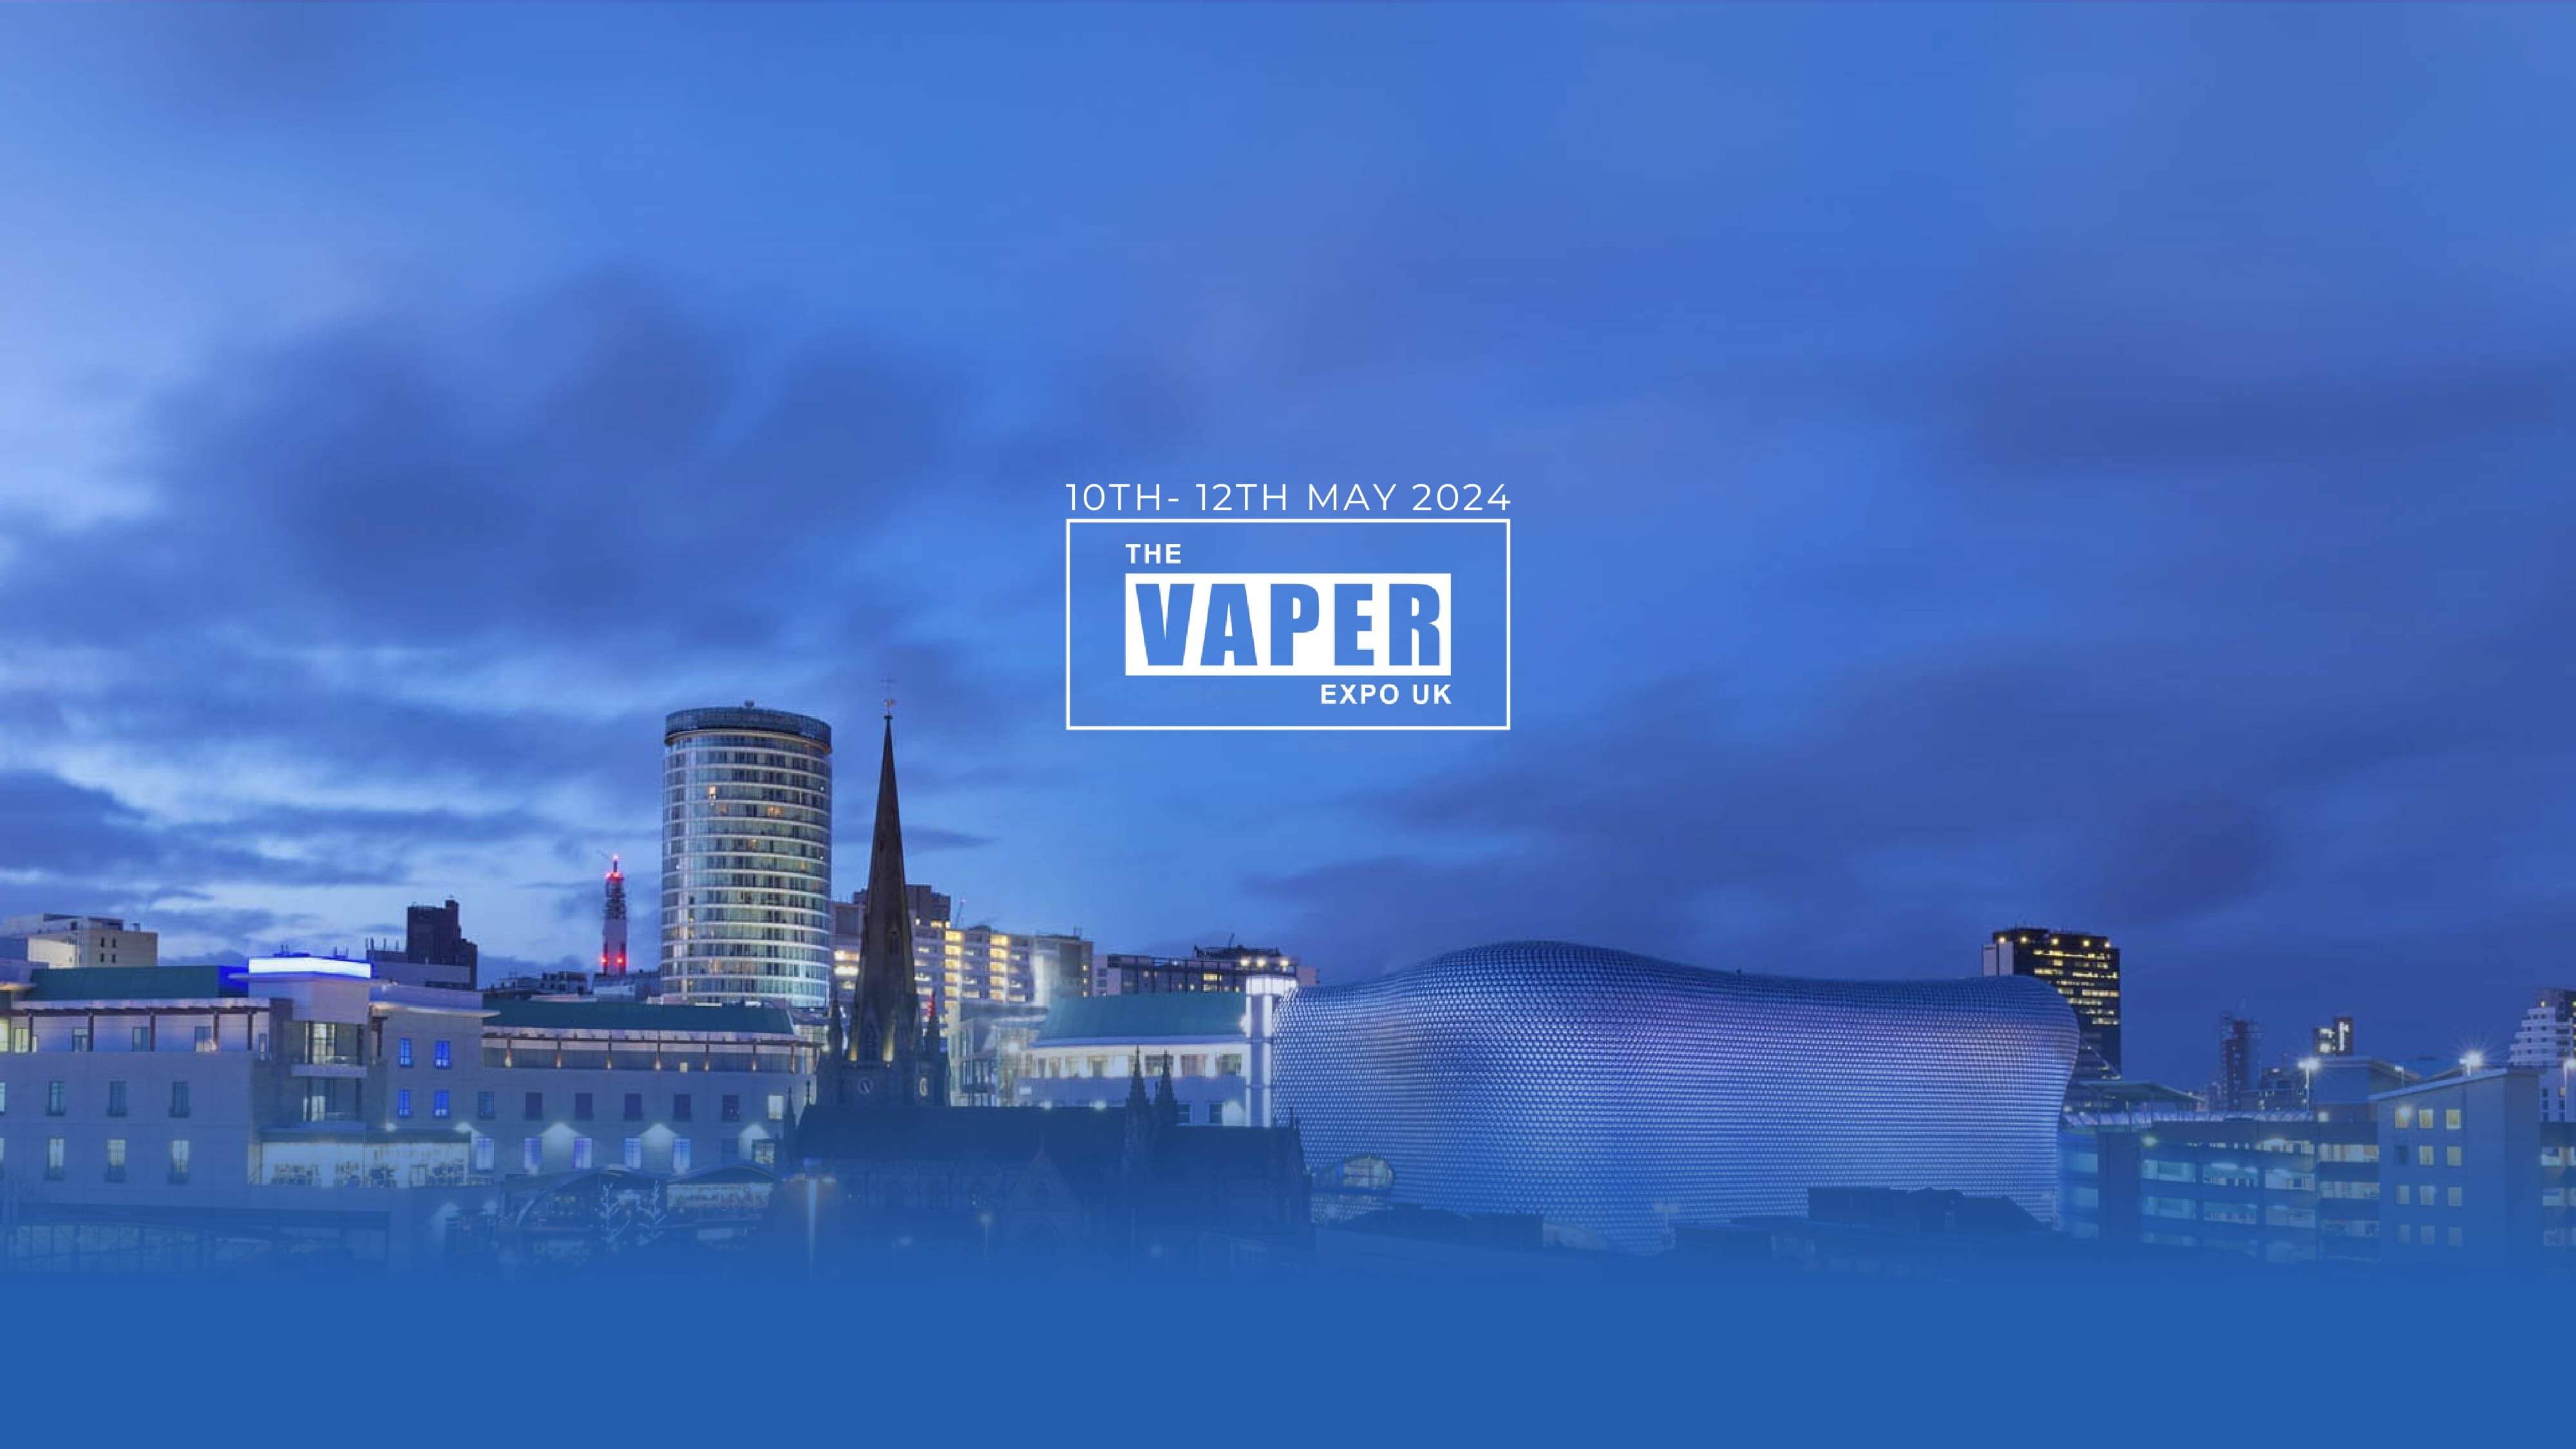 Explore Hangsen’ s Latest European E-liquid Solutions and New Products at The Vaper Expo UK 2024